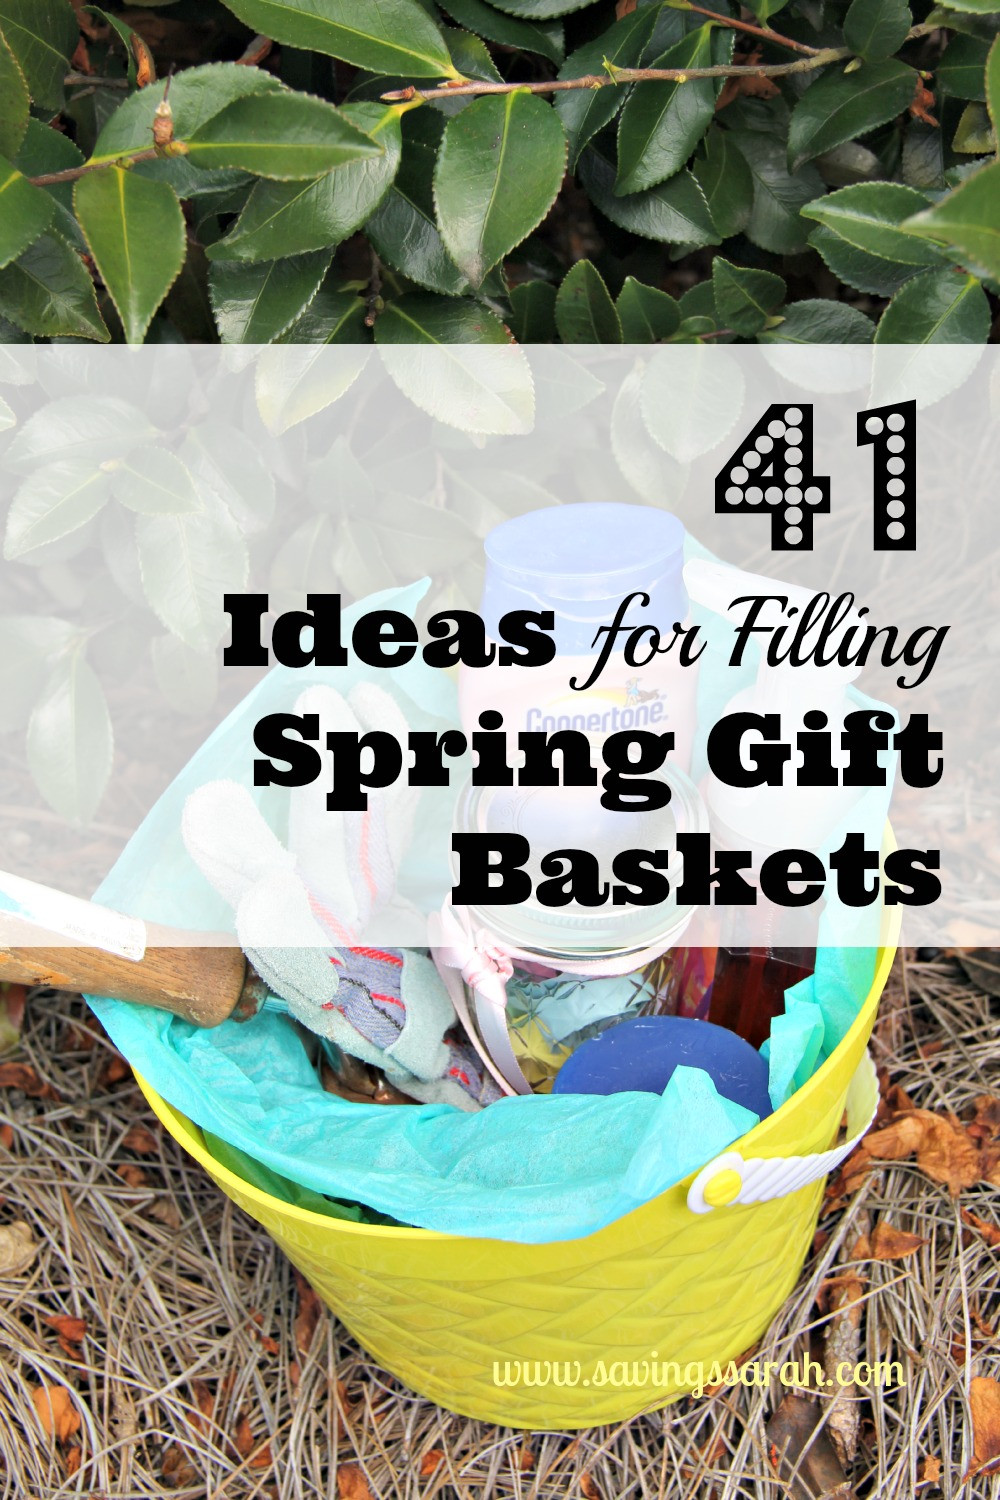 Spring Gift Basket Ideas
 41 Ideas to Fill Spring Gift Baskets Earning and Saving